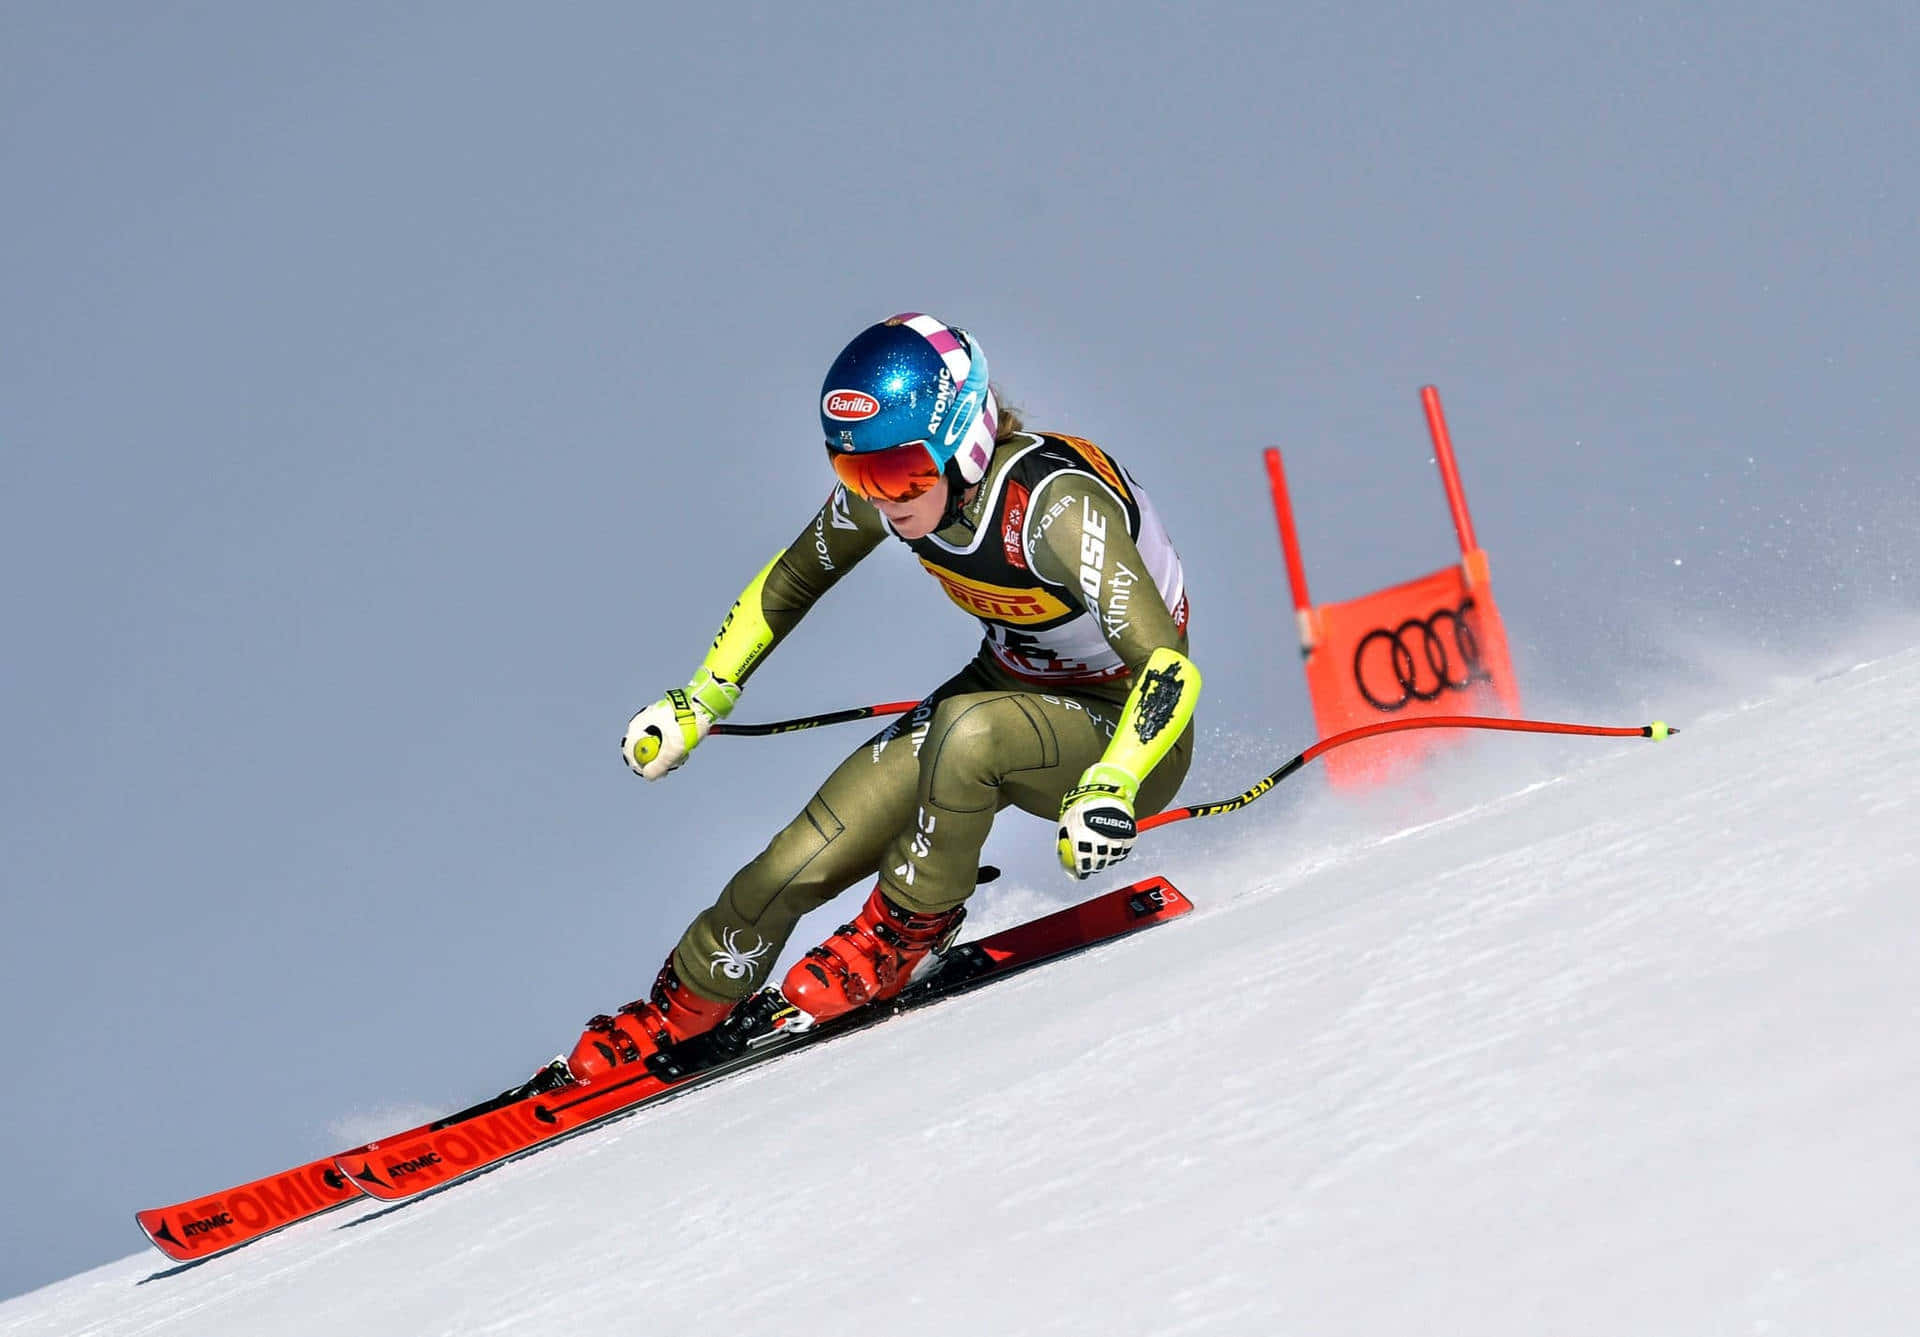 A skier carving through fresh powder on a sunny slope